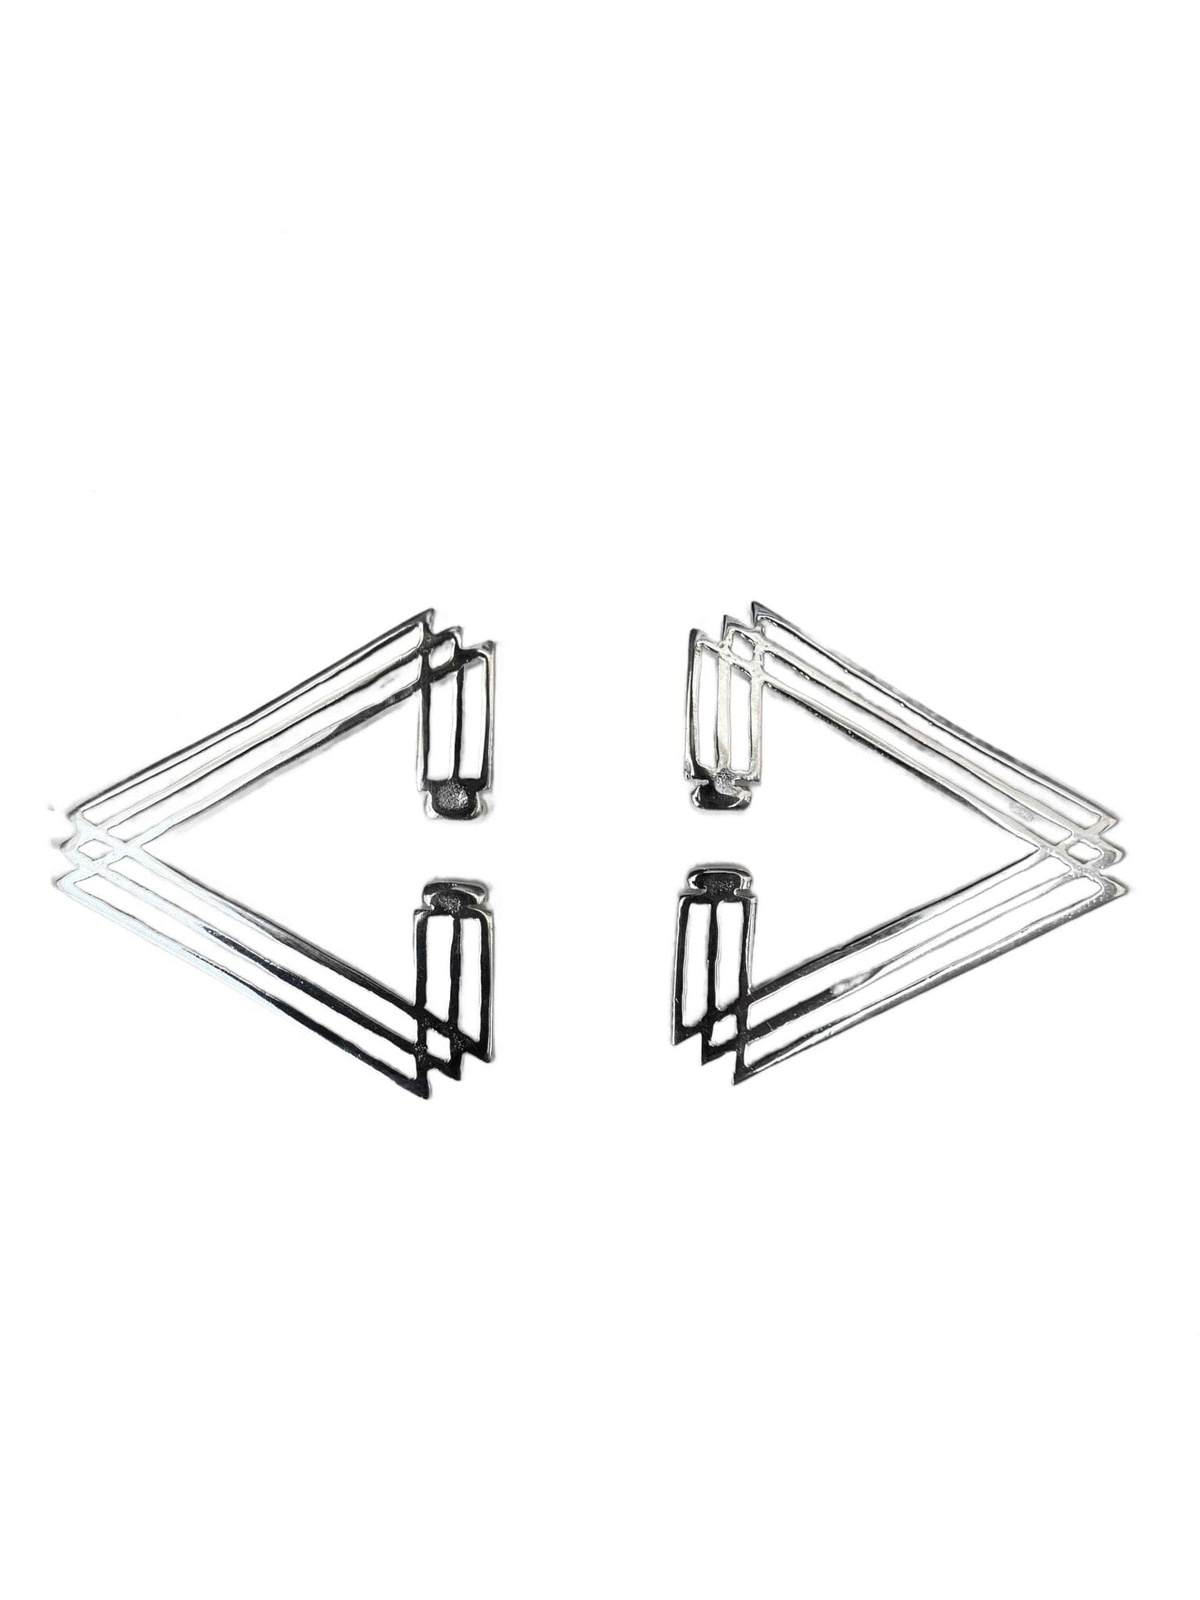 Silver Triangle Earring Cuffs from Love Khaos